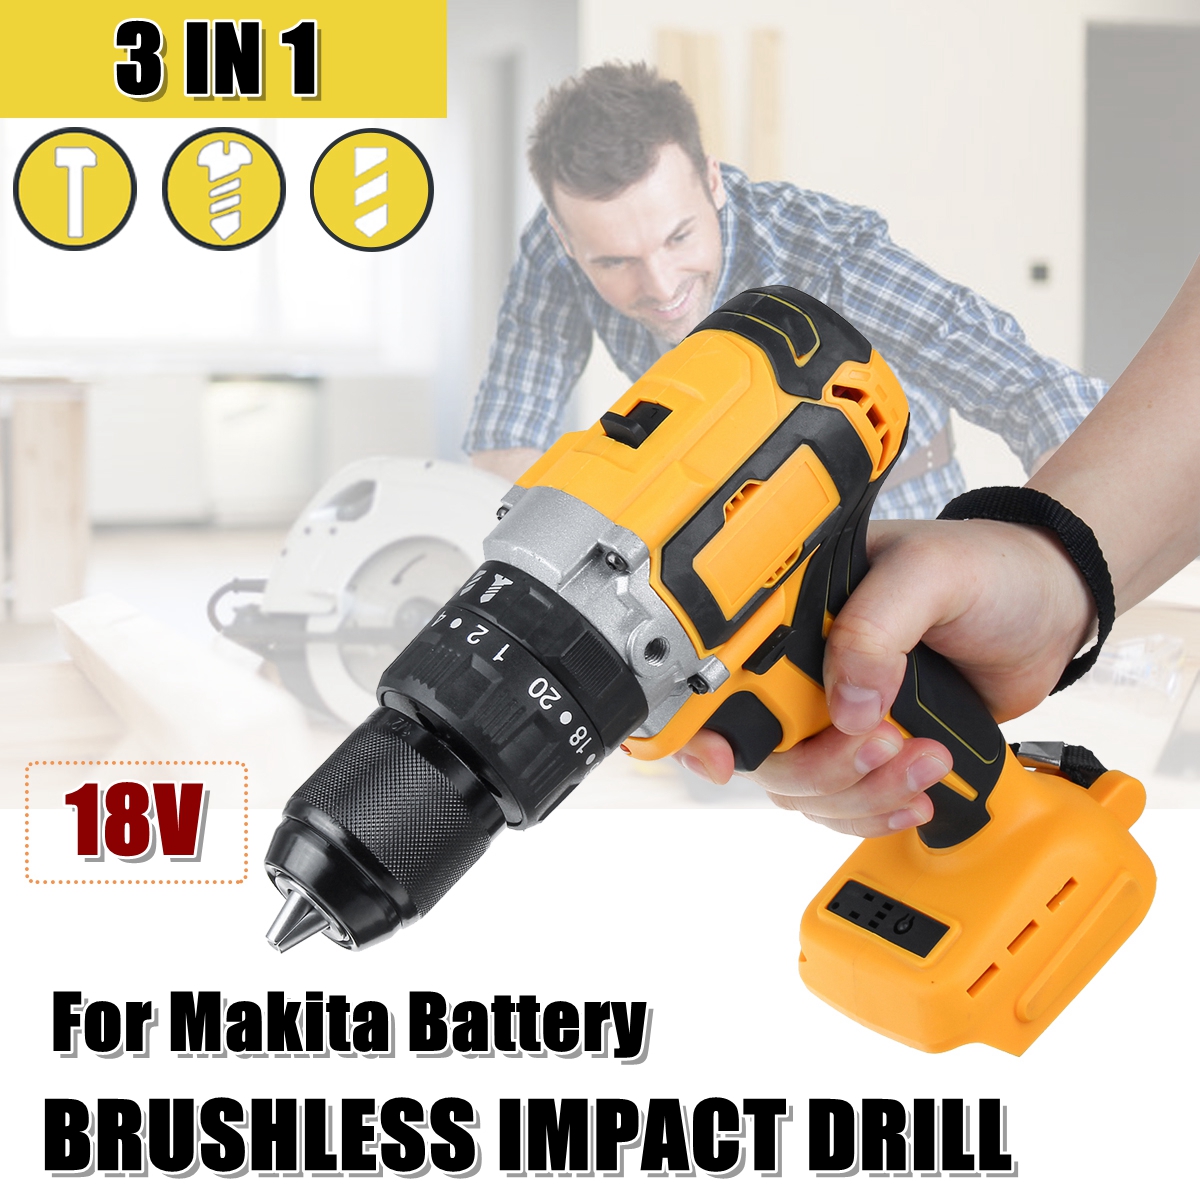 18V-Electric-Impact-Drill-13mm-4000RPM-Brushless-Electric-Screwdriver-for-Makita-Battery-1724290-1